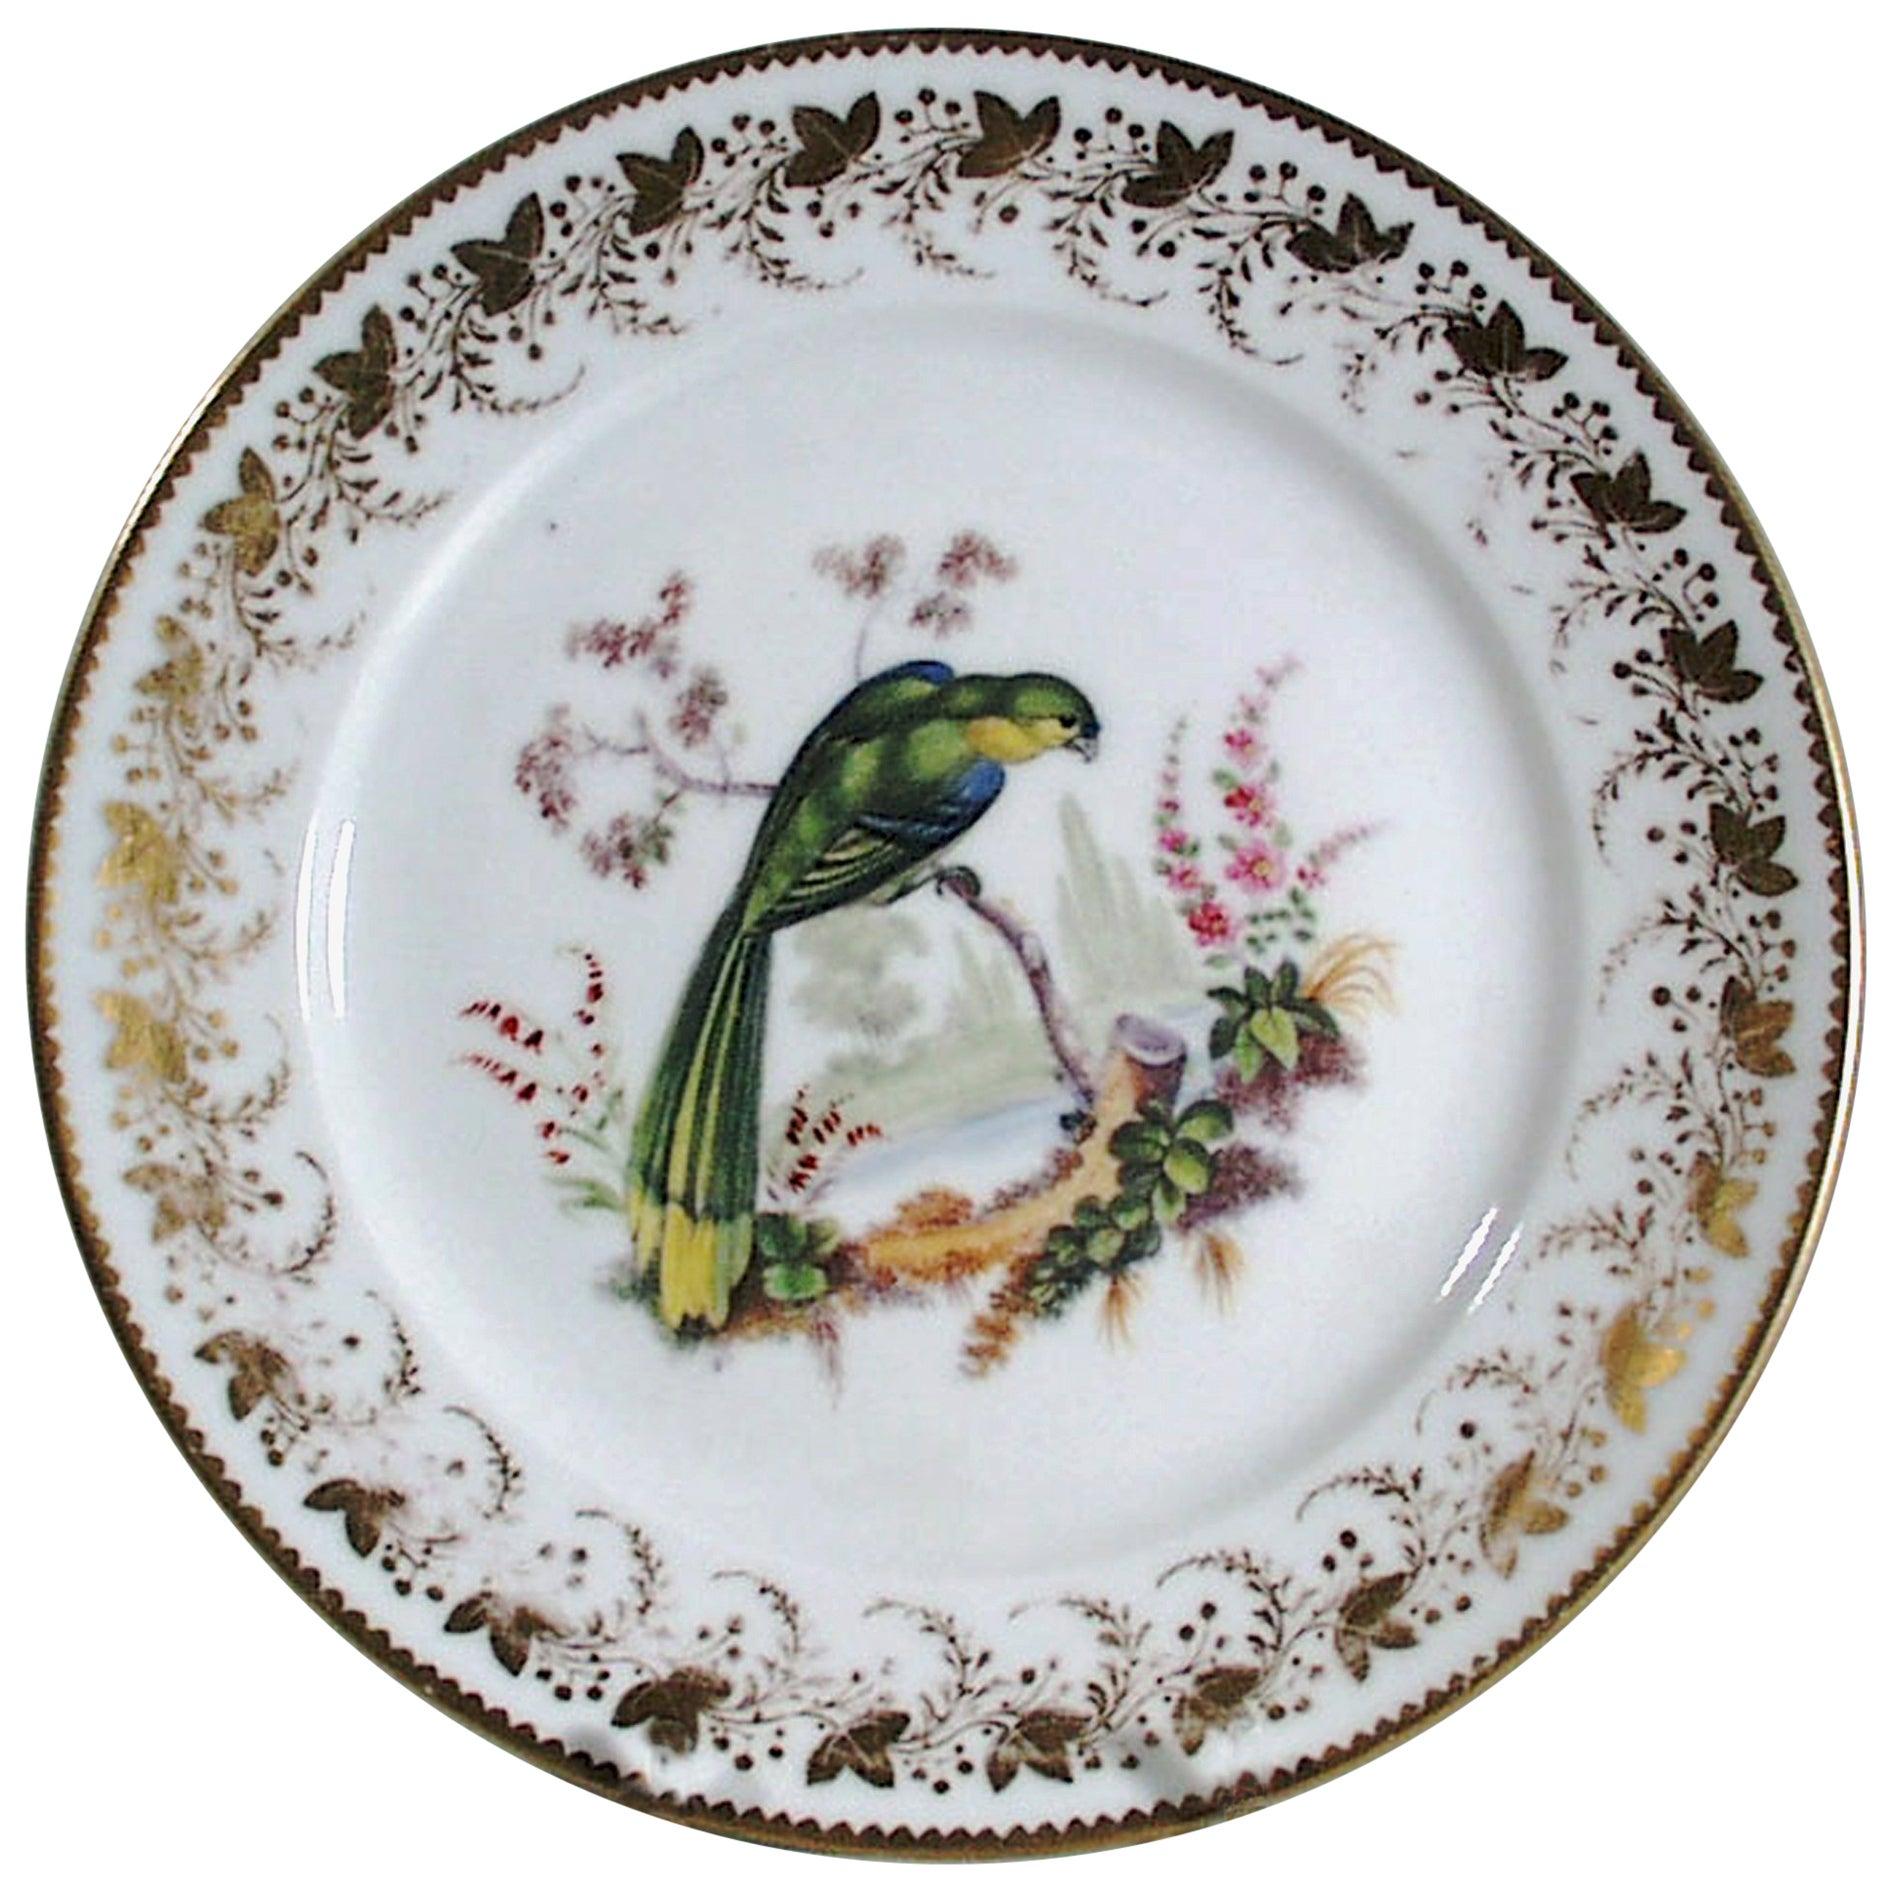 Antique London-Decorated Paris Porcelain Plate Probably by Thomas Randall